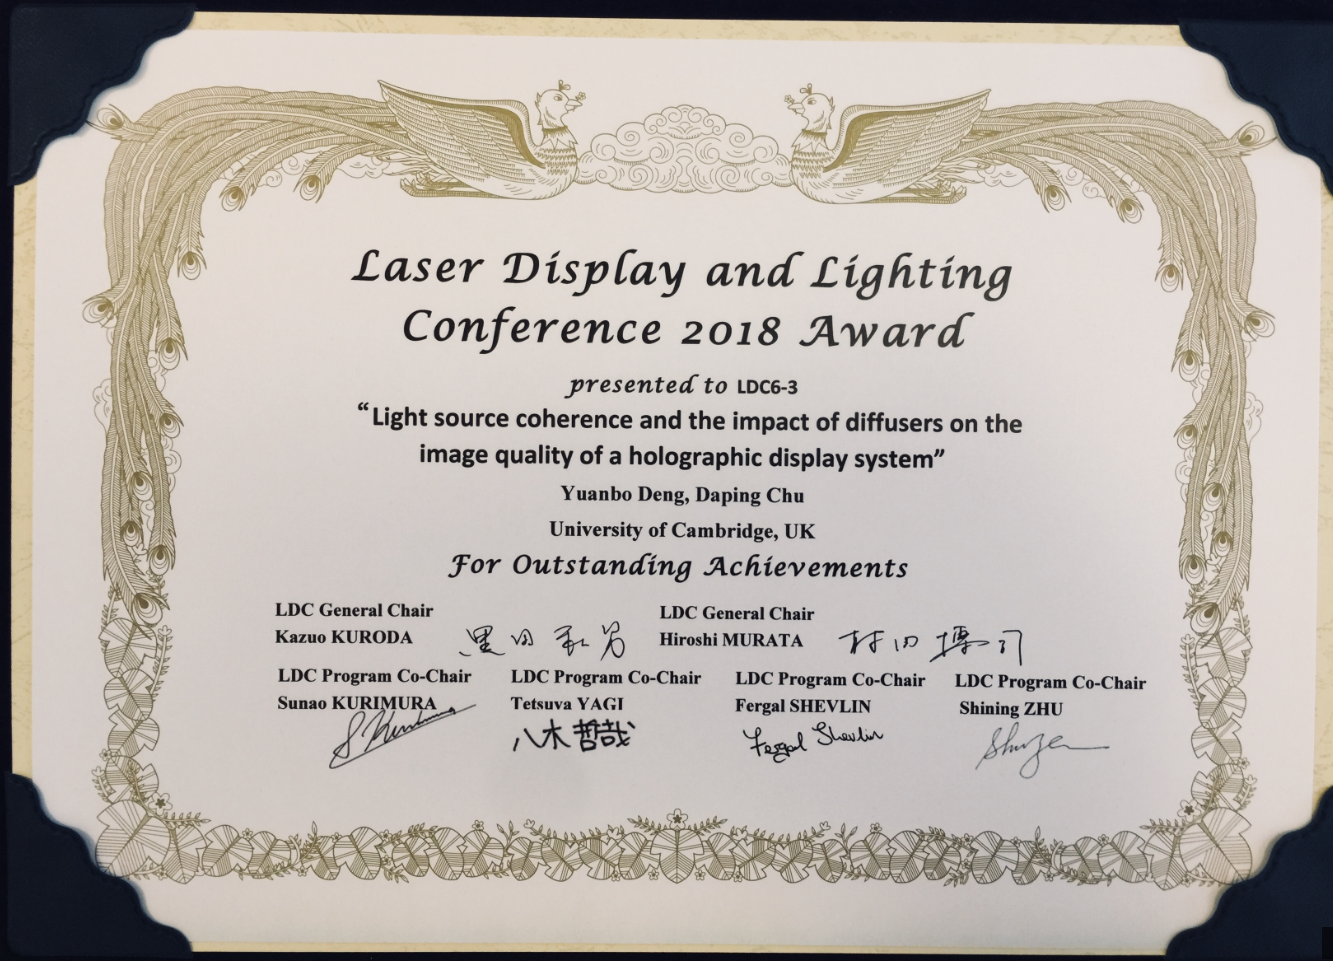 Dr Yuanbo Deng received Outstanding Achievement Award at the Laser Display and Lighting Conference 2018 (2018.05.24)